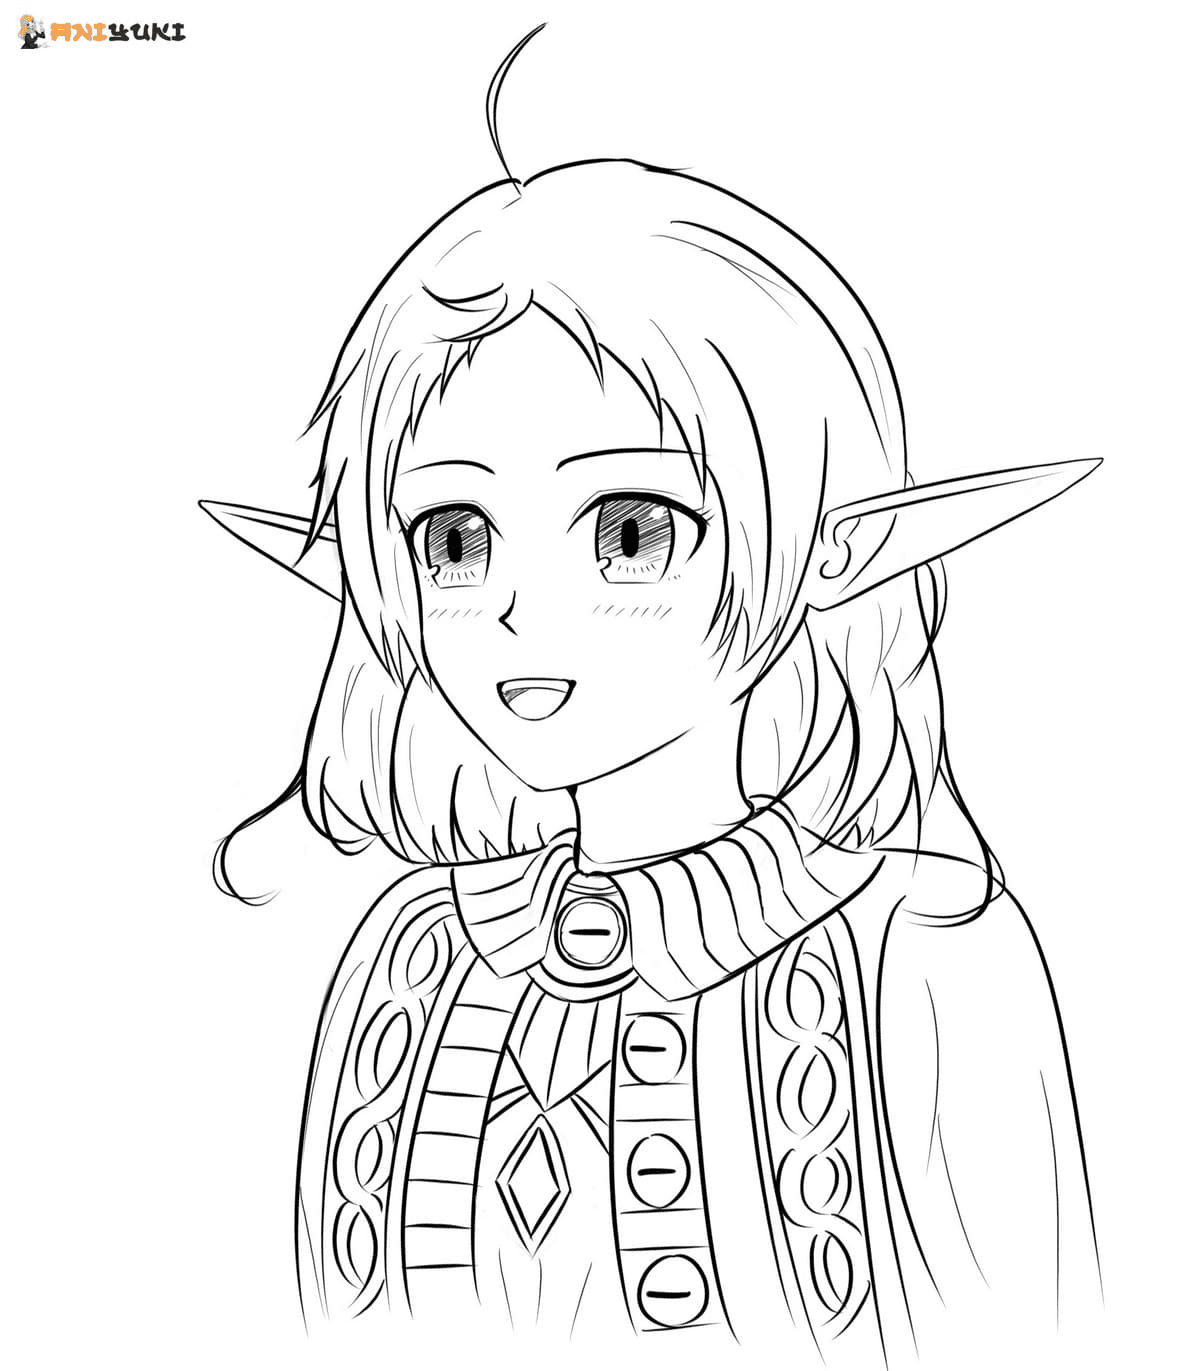 Sylphiette from Mushoku Tensei Coloring Page